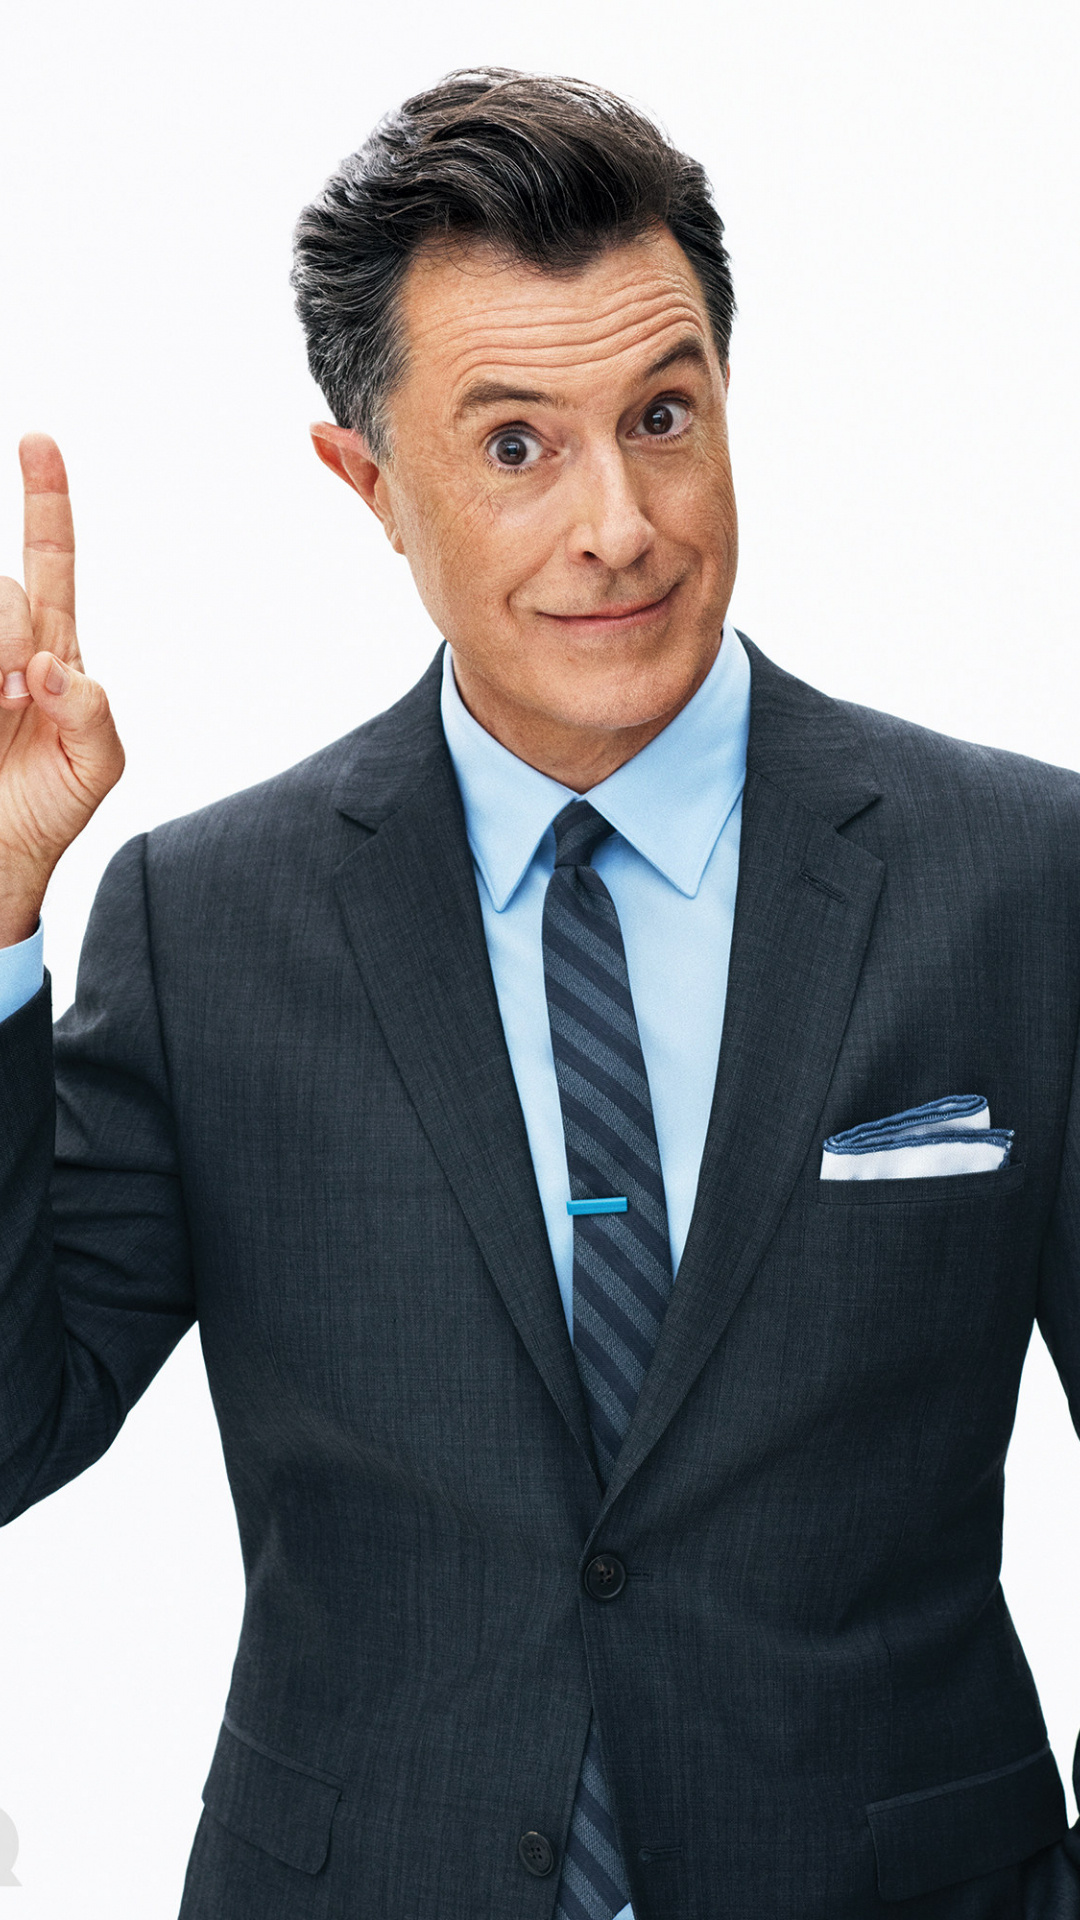 Stephen Colbert wallpapers high resolution, Quality download, Celebrity portraits, Stephen Curry crossover, 1080x1920 Full HD Phone